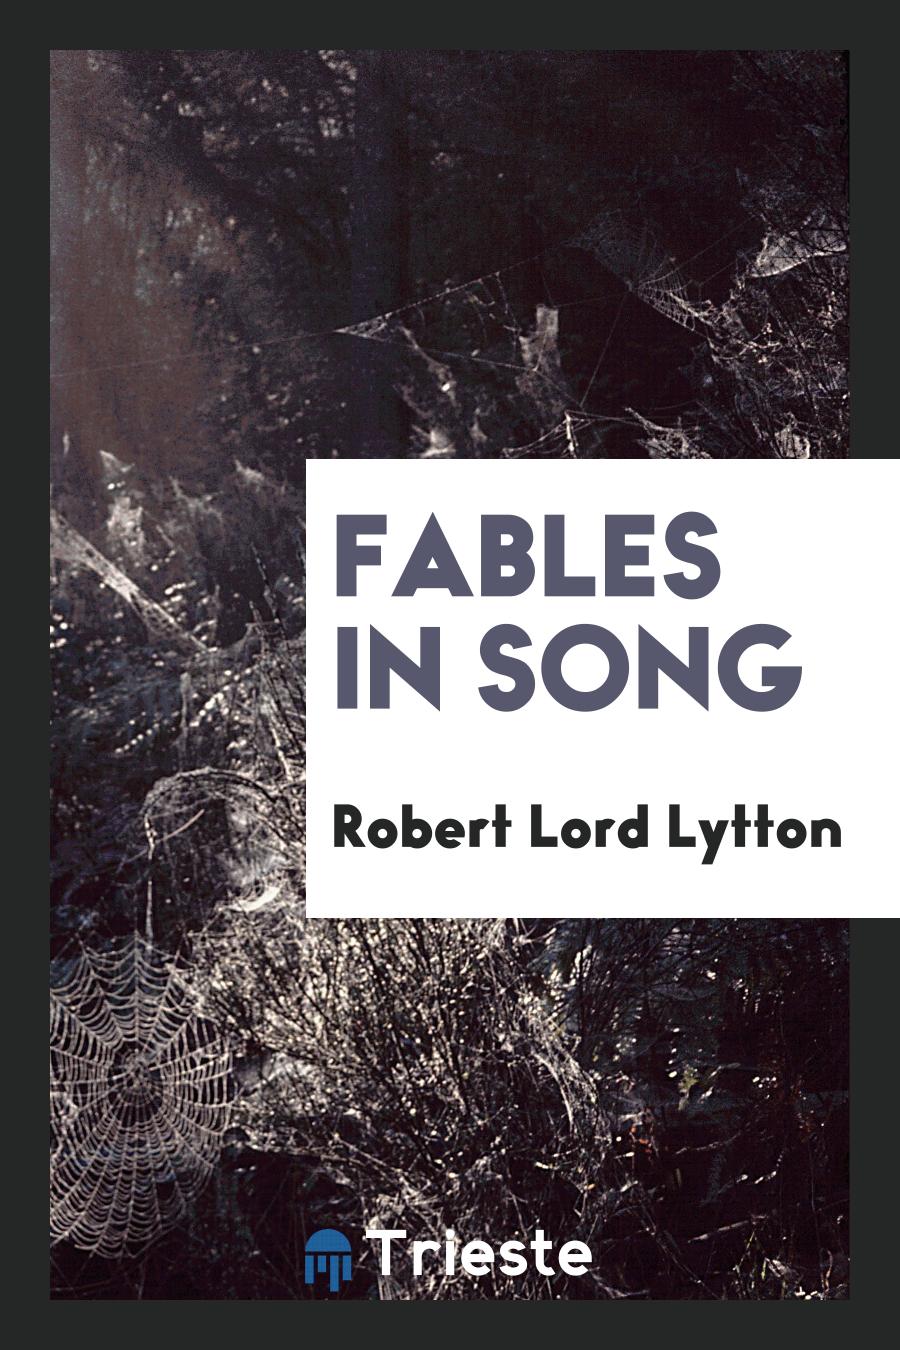 Robert Lord Lytton - Fables in song